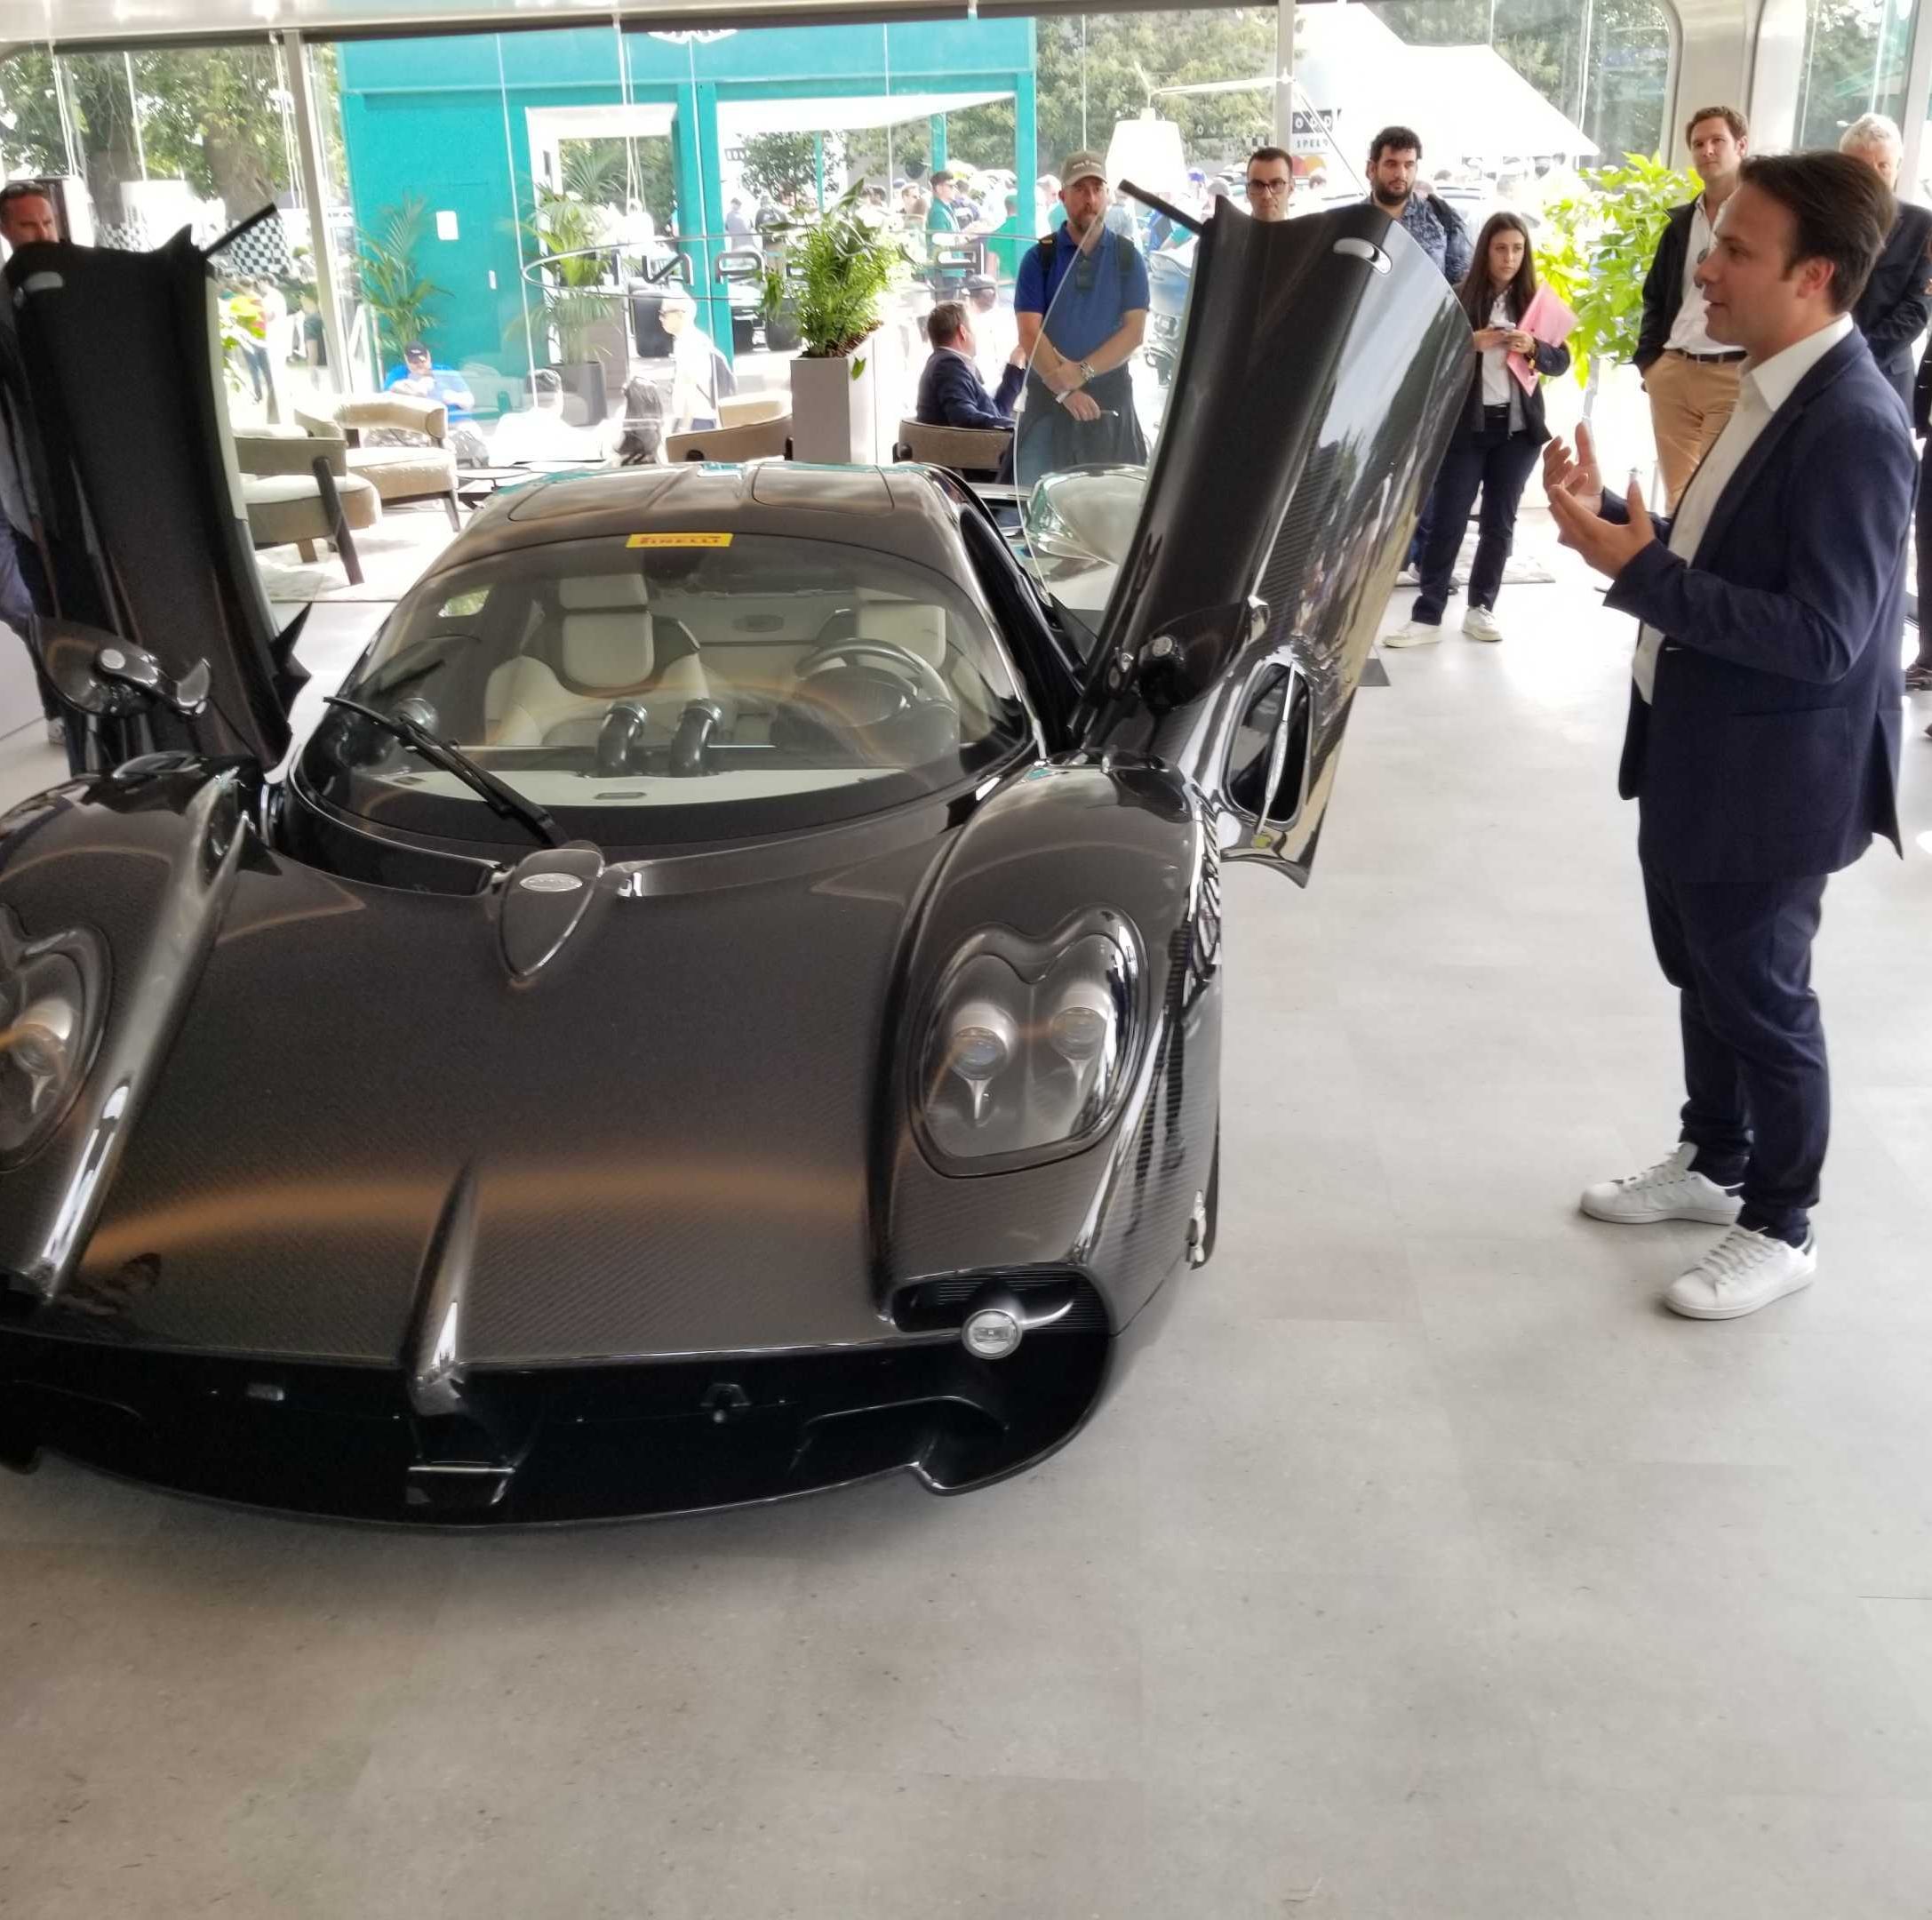 Why You Must Attend Goodwood Festival of Speed, at Least Once